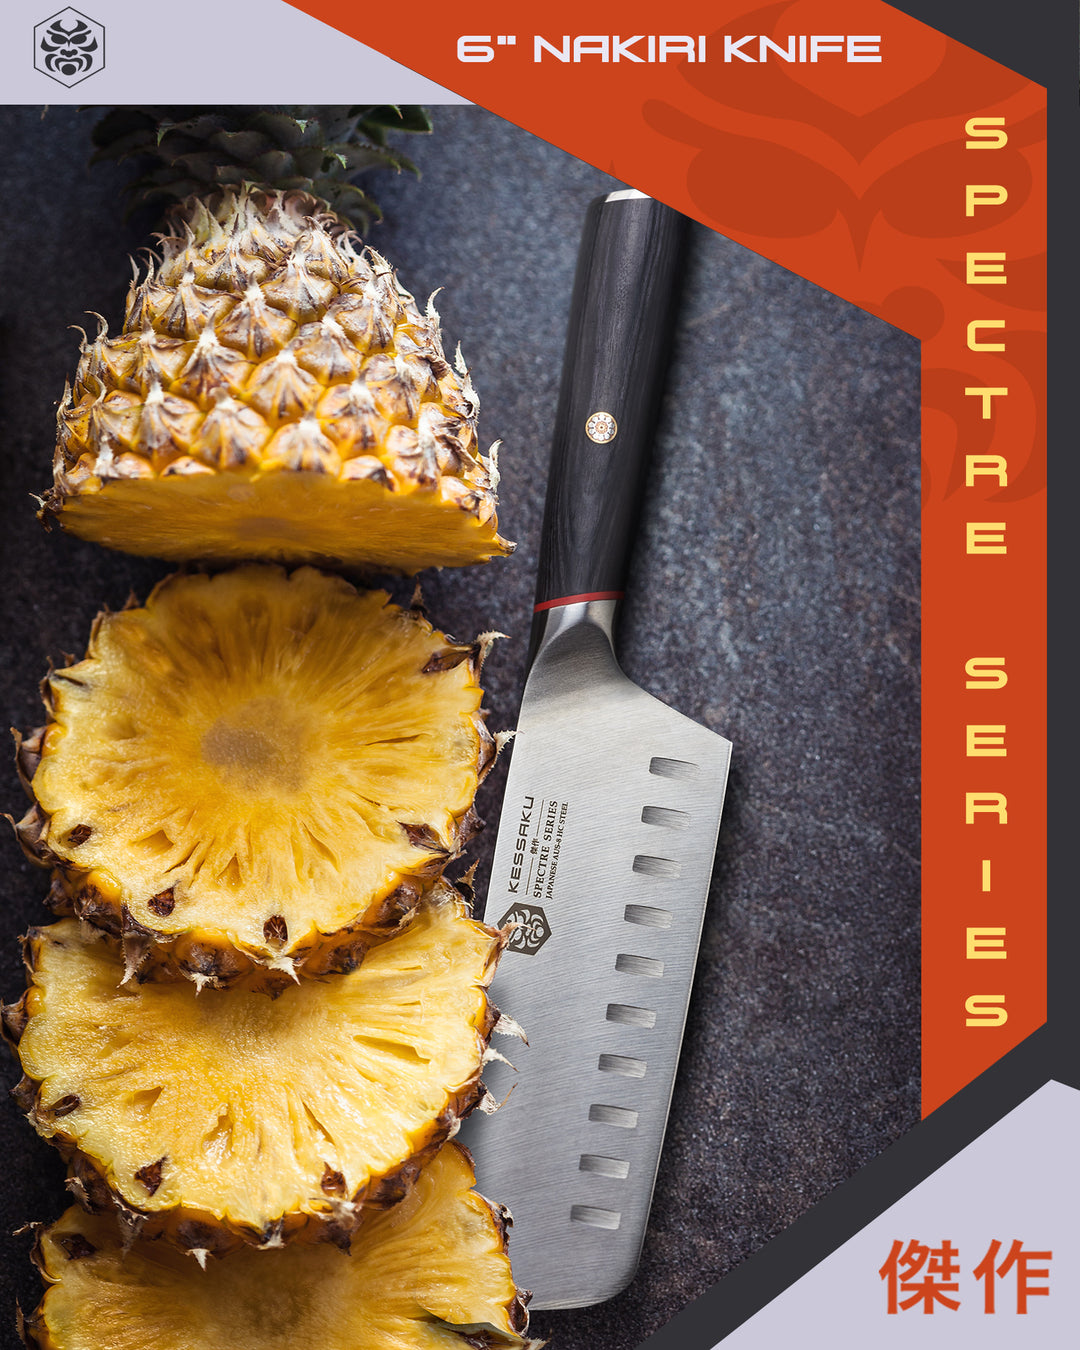 The Spectre Nakiri next to thick slices of pineapple